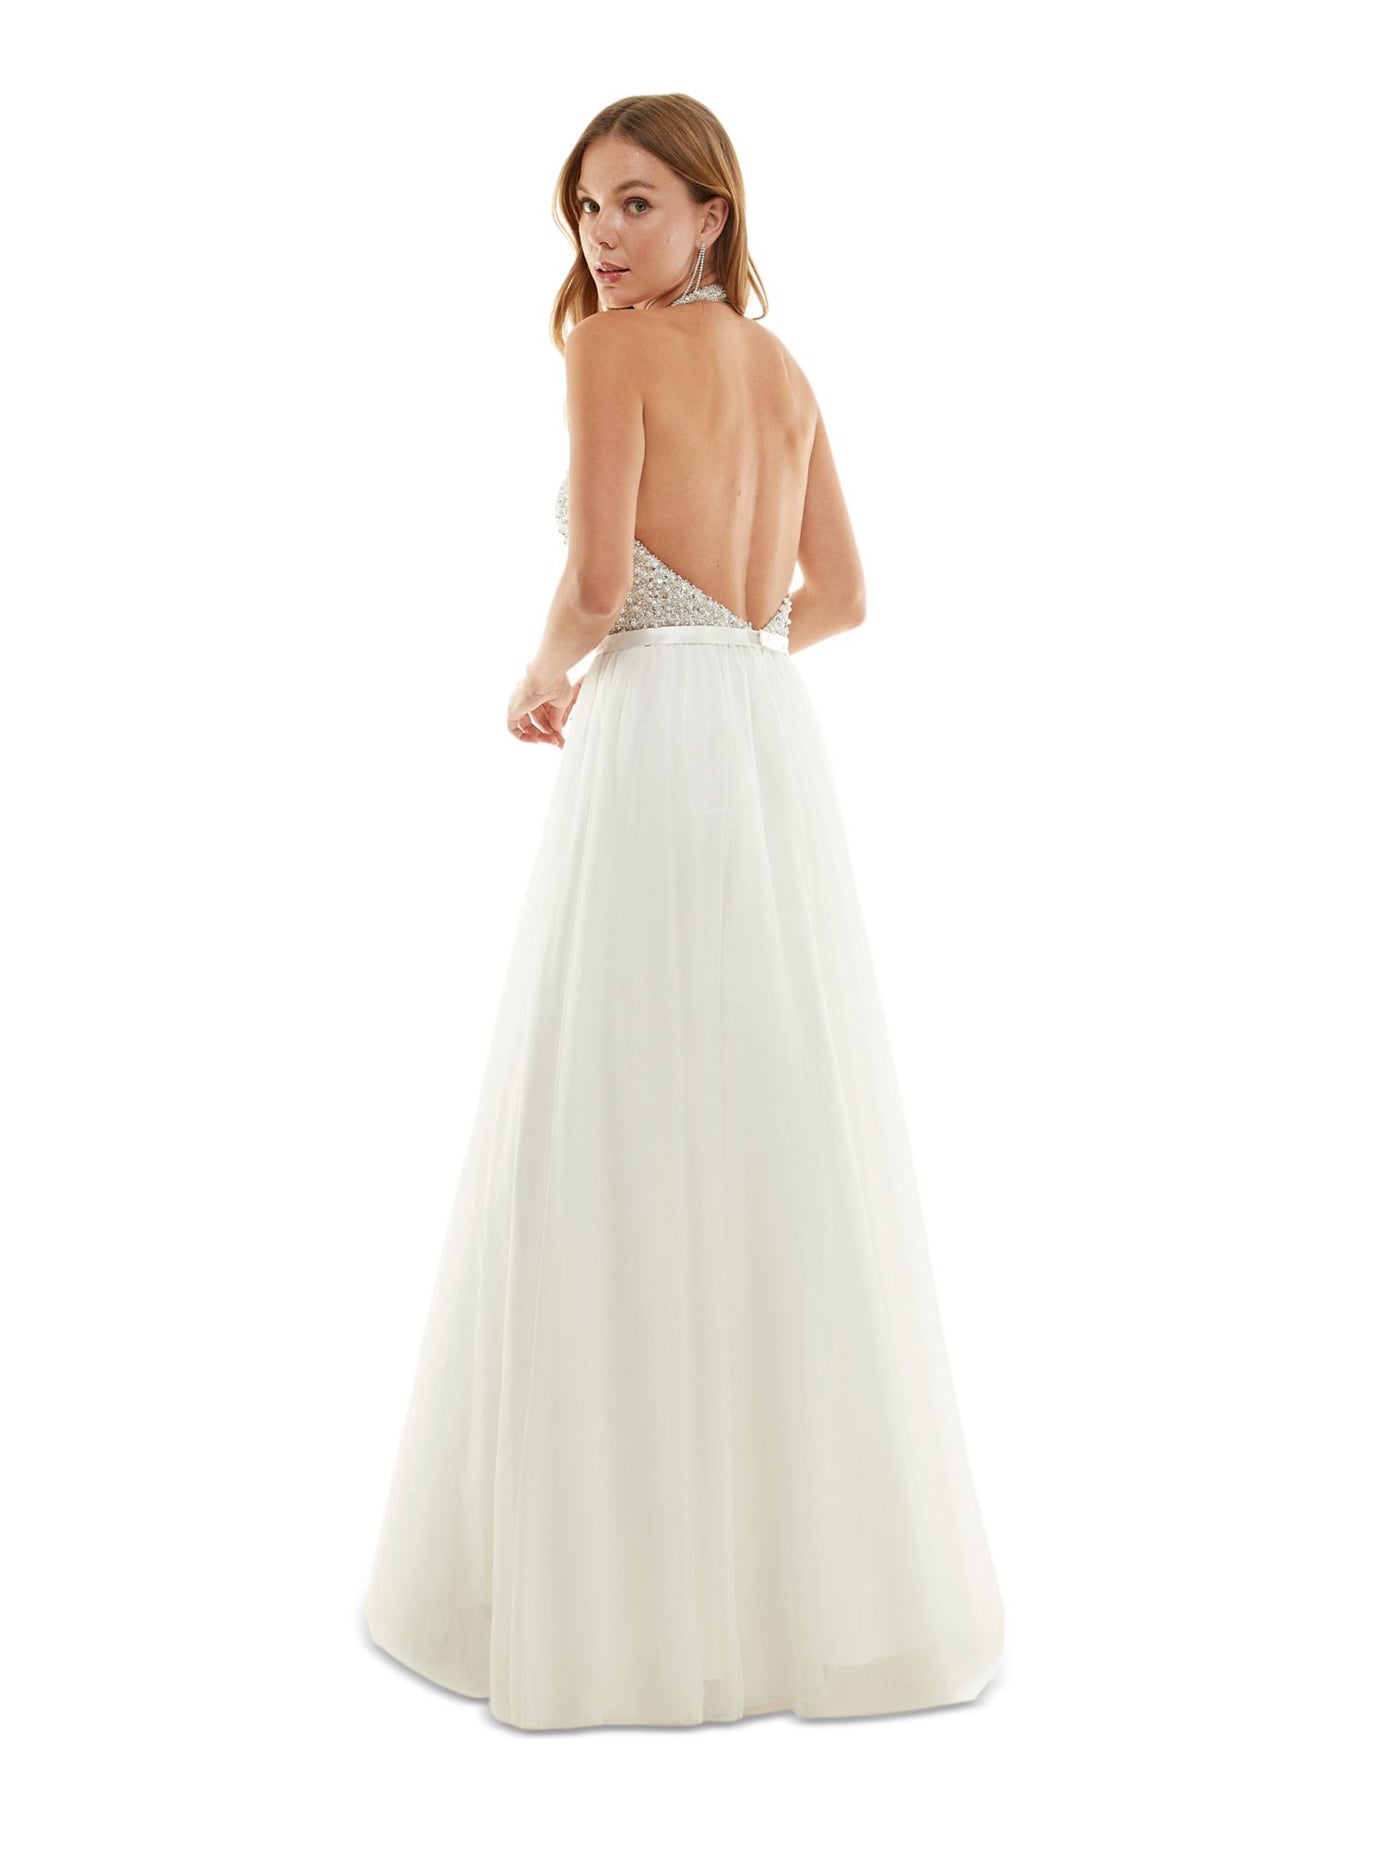 SAY YES TO THE PROM Womens White Open Back Zippered Belted Lined Sleeveless Halter Full-Length Prom Gown Dress Juniors 7